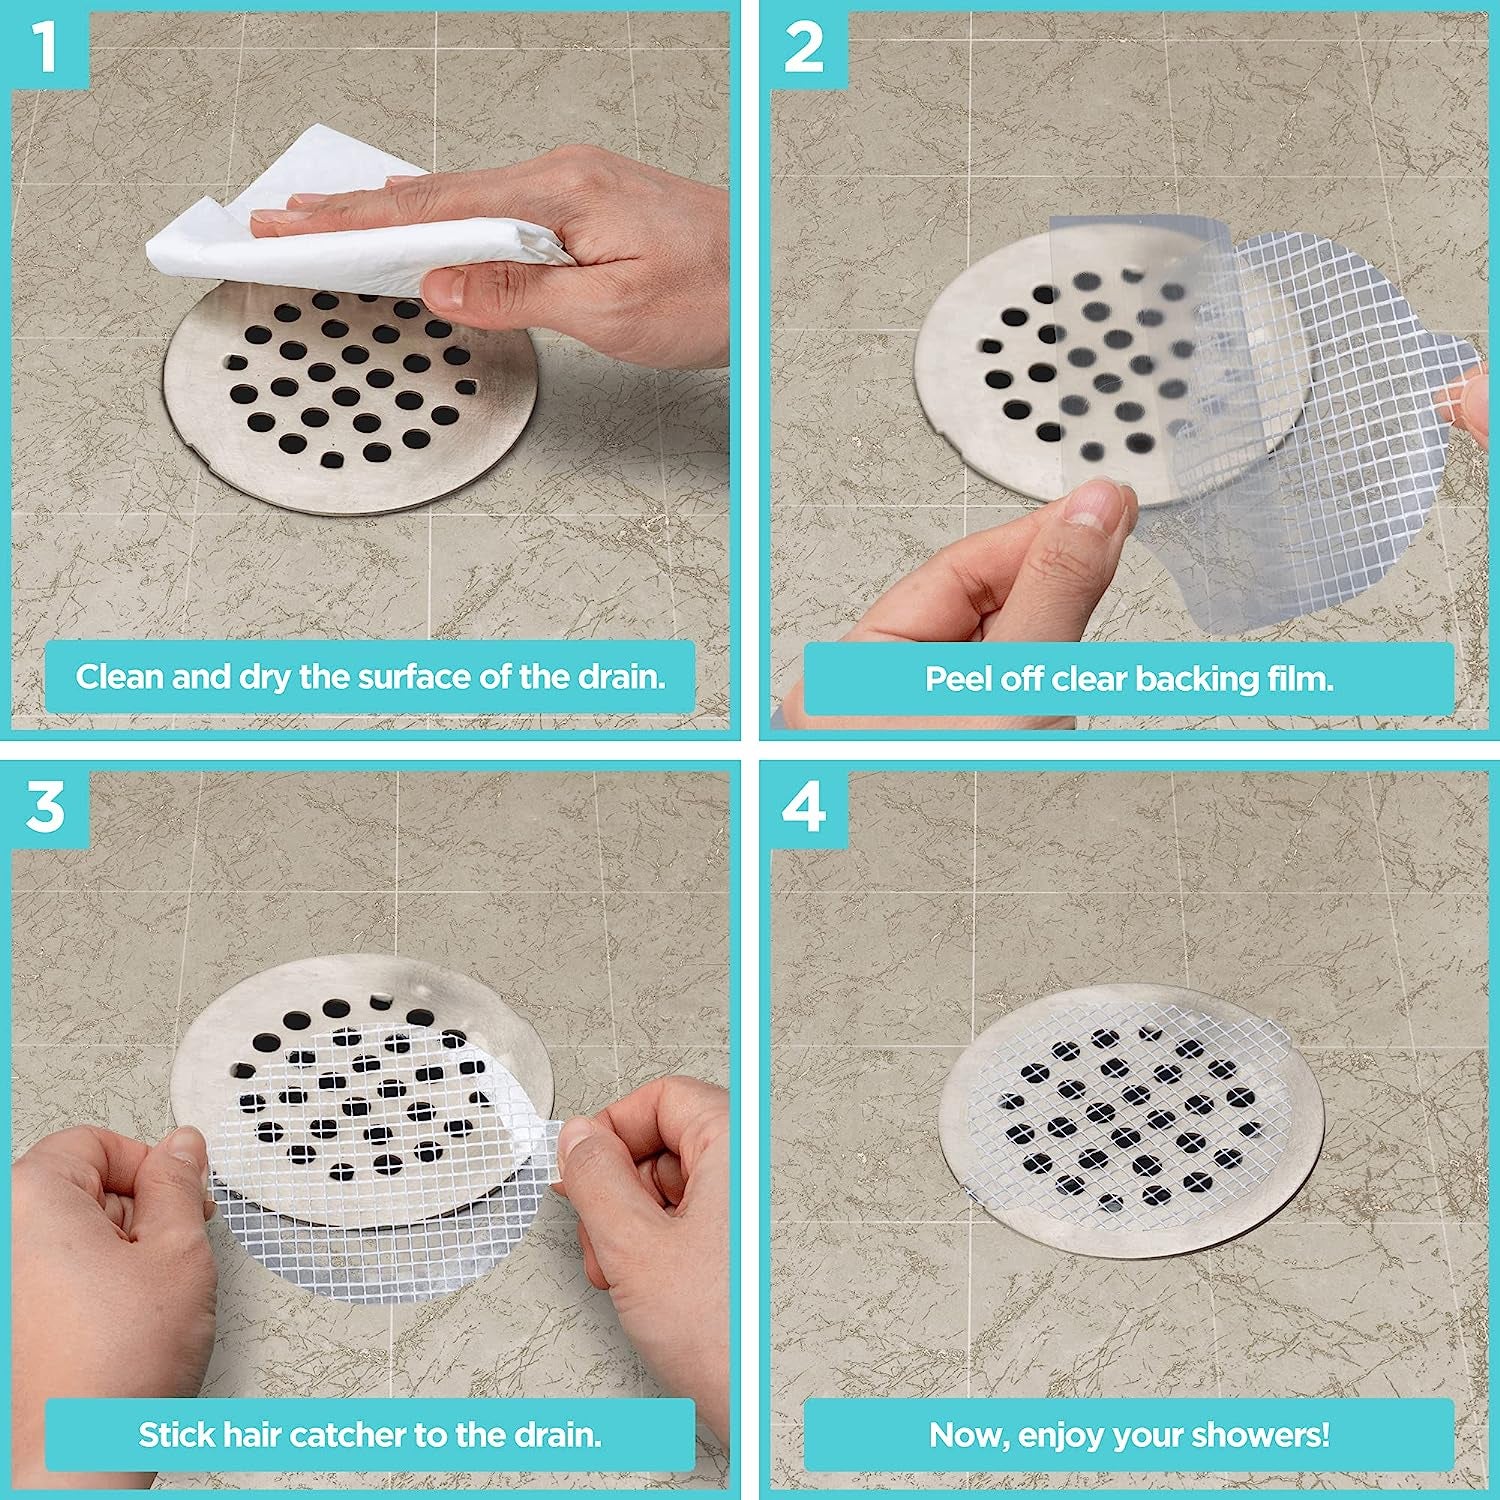 series of photos showing how to install the hair catcher